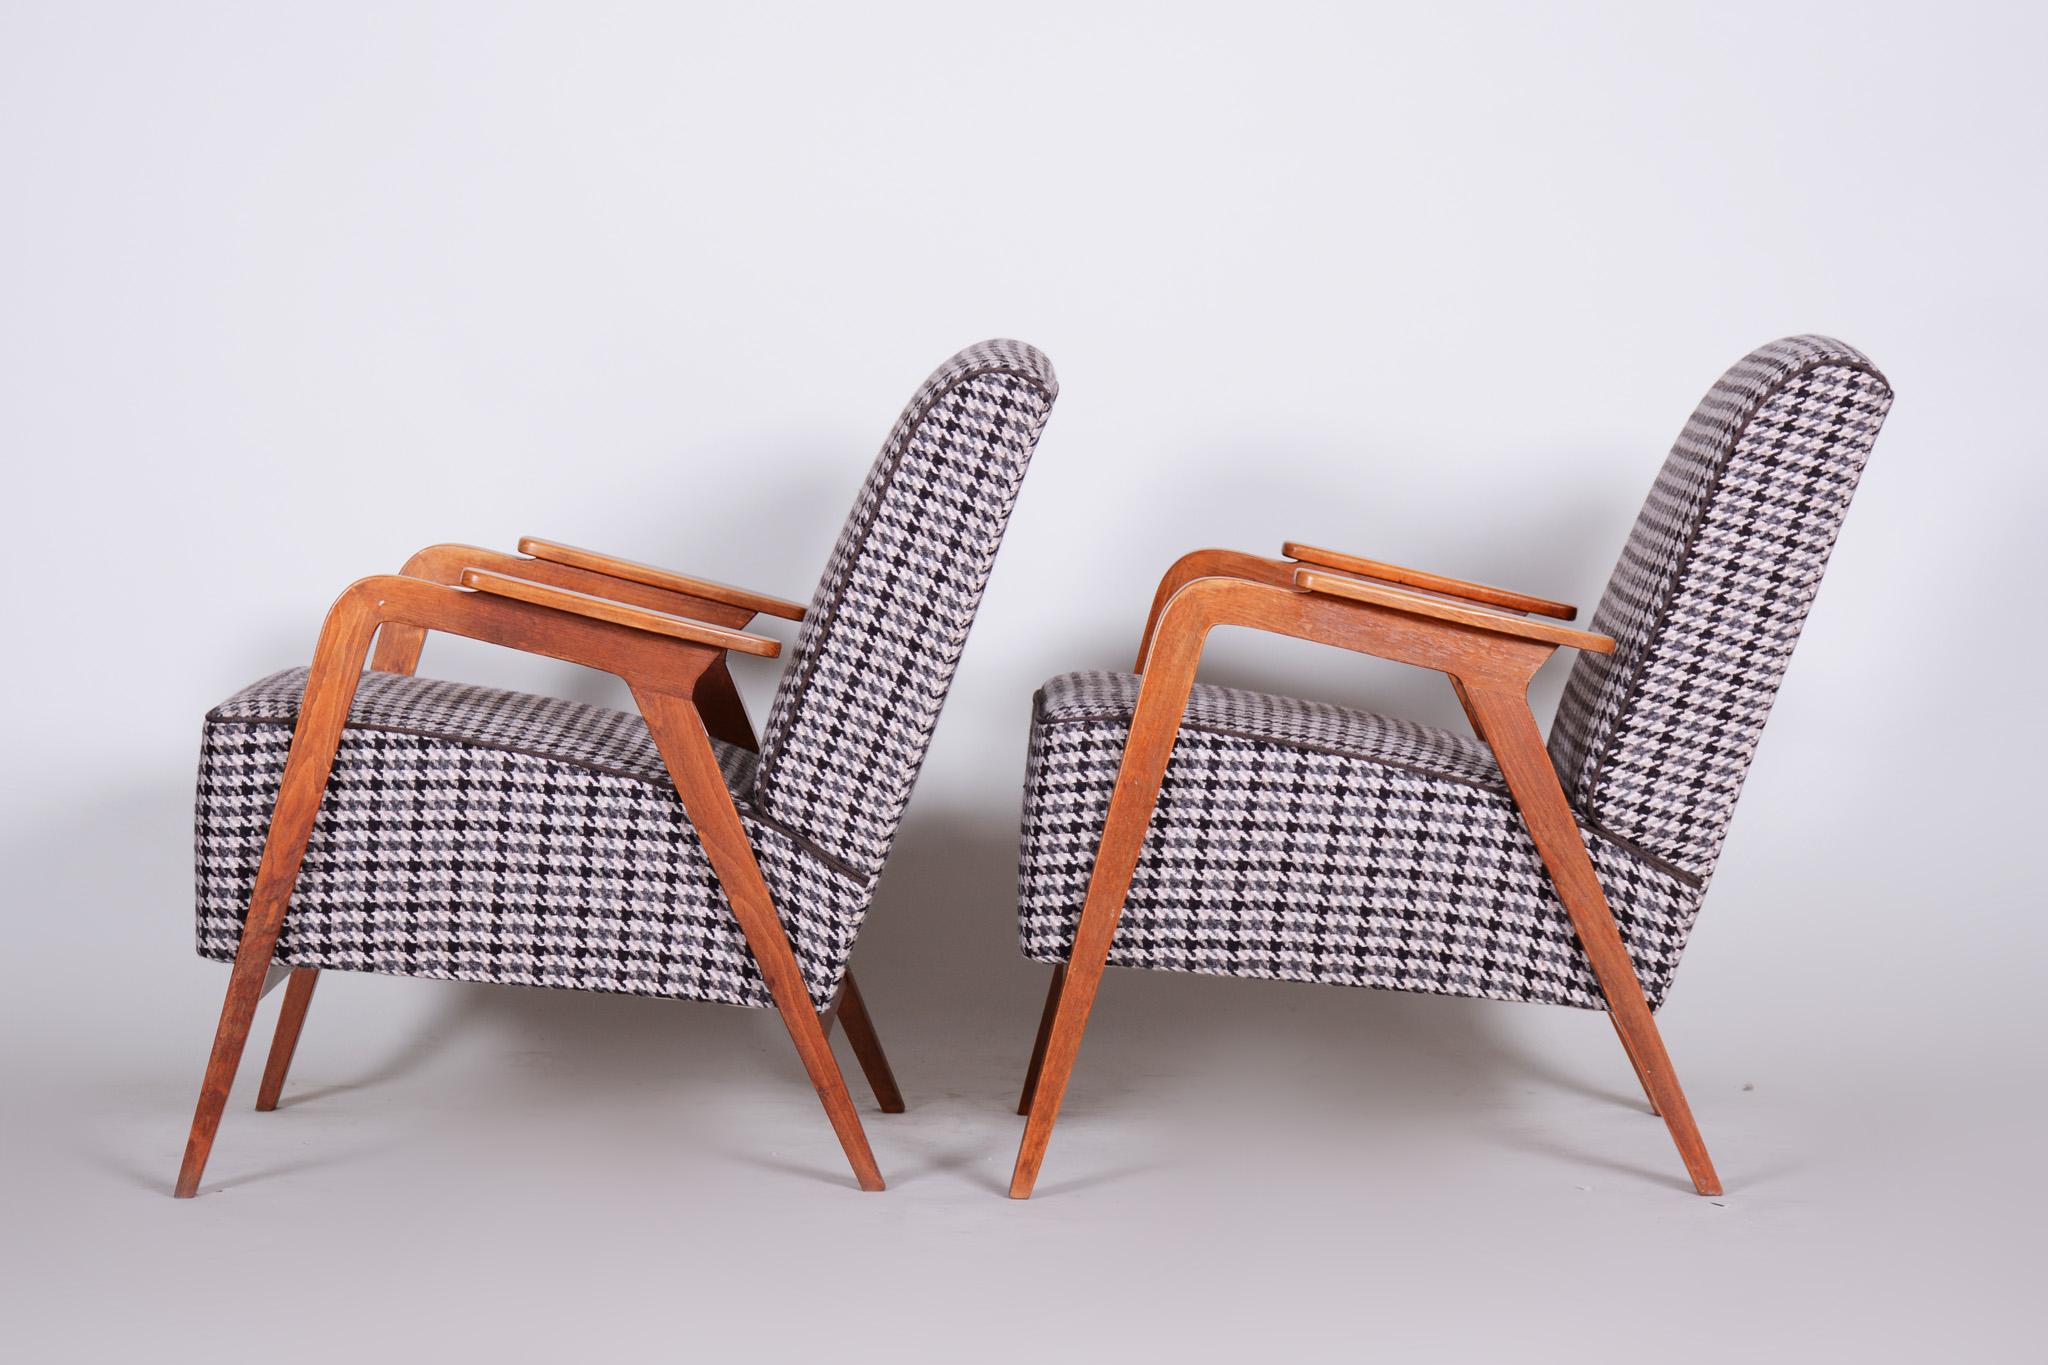 Pair of Restored Czech Midcentury Brown Beech Armchairs, 1940s, New Upholstery 1